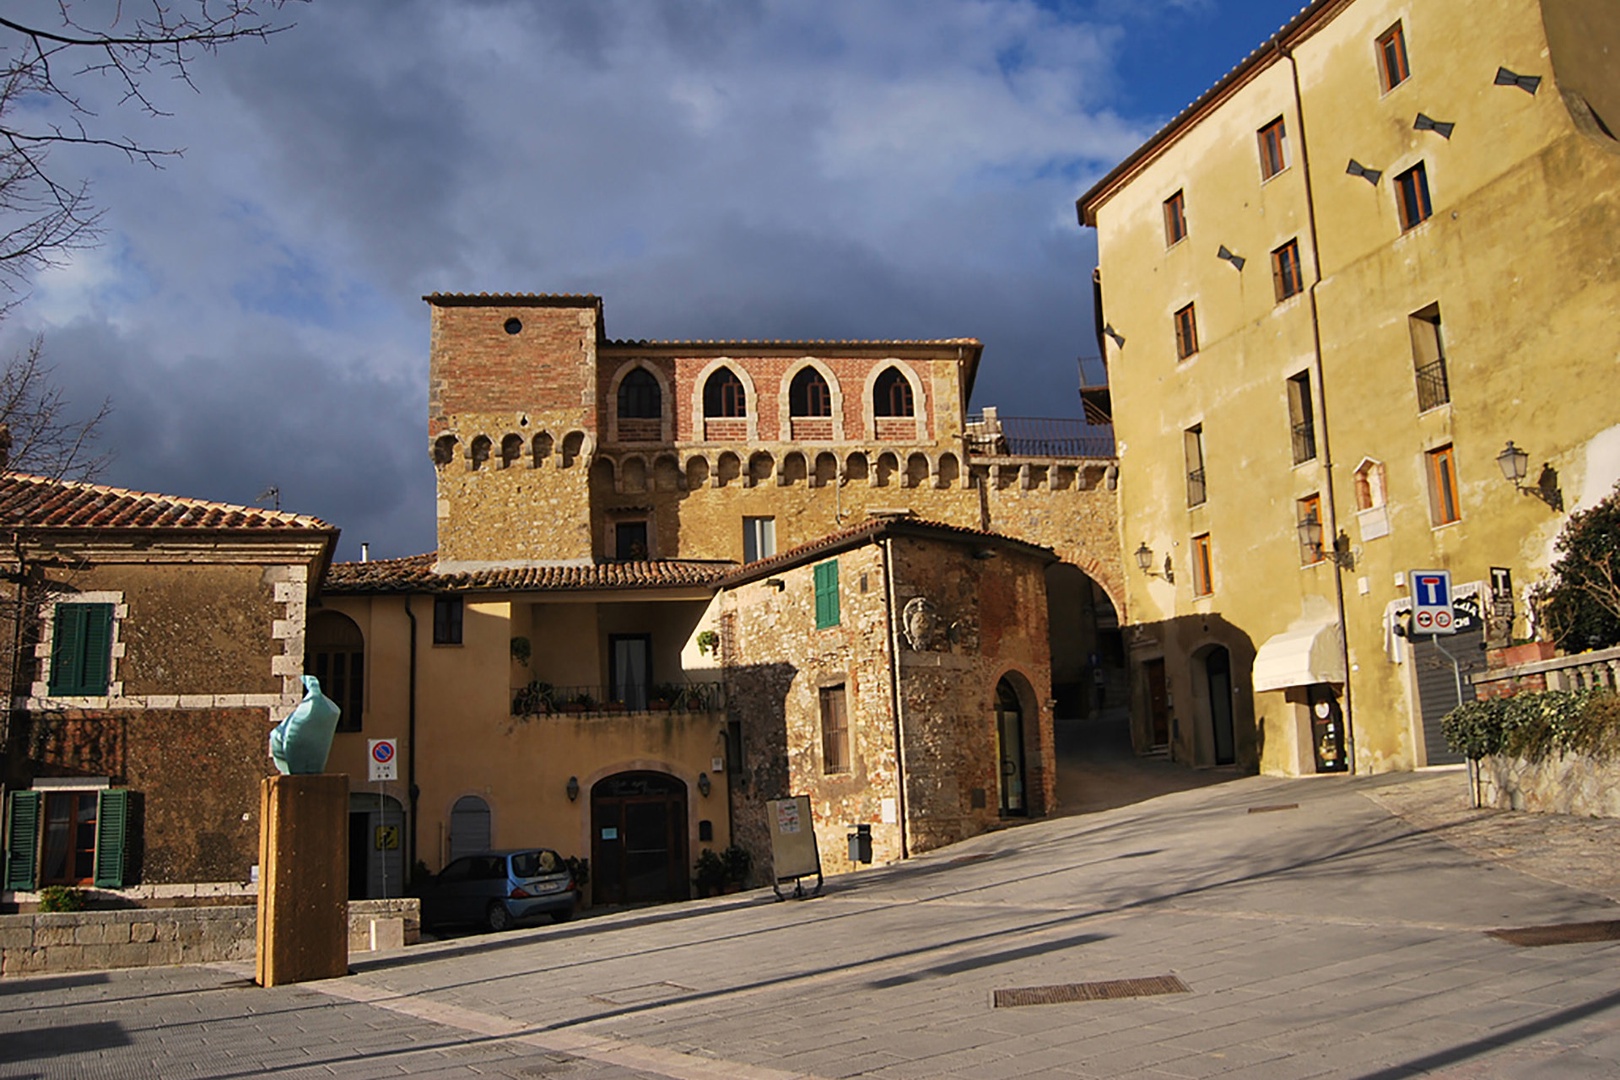 The main piazza of San Casciano reflects the slope of the hill on which it stands.